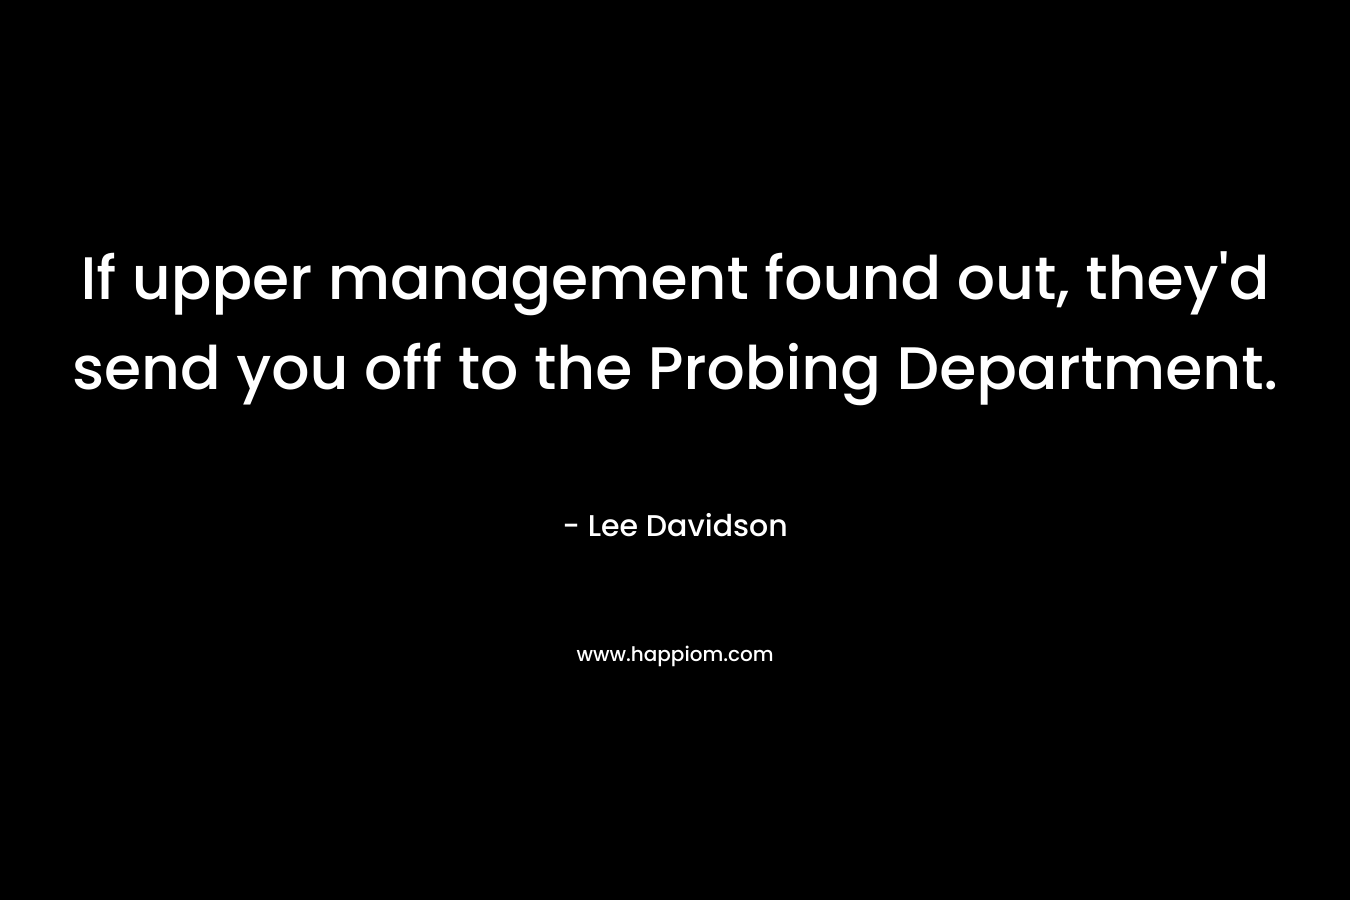 If upper management found out, they’d send you off to the Probing Department. – Lee Davidson